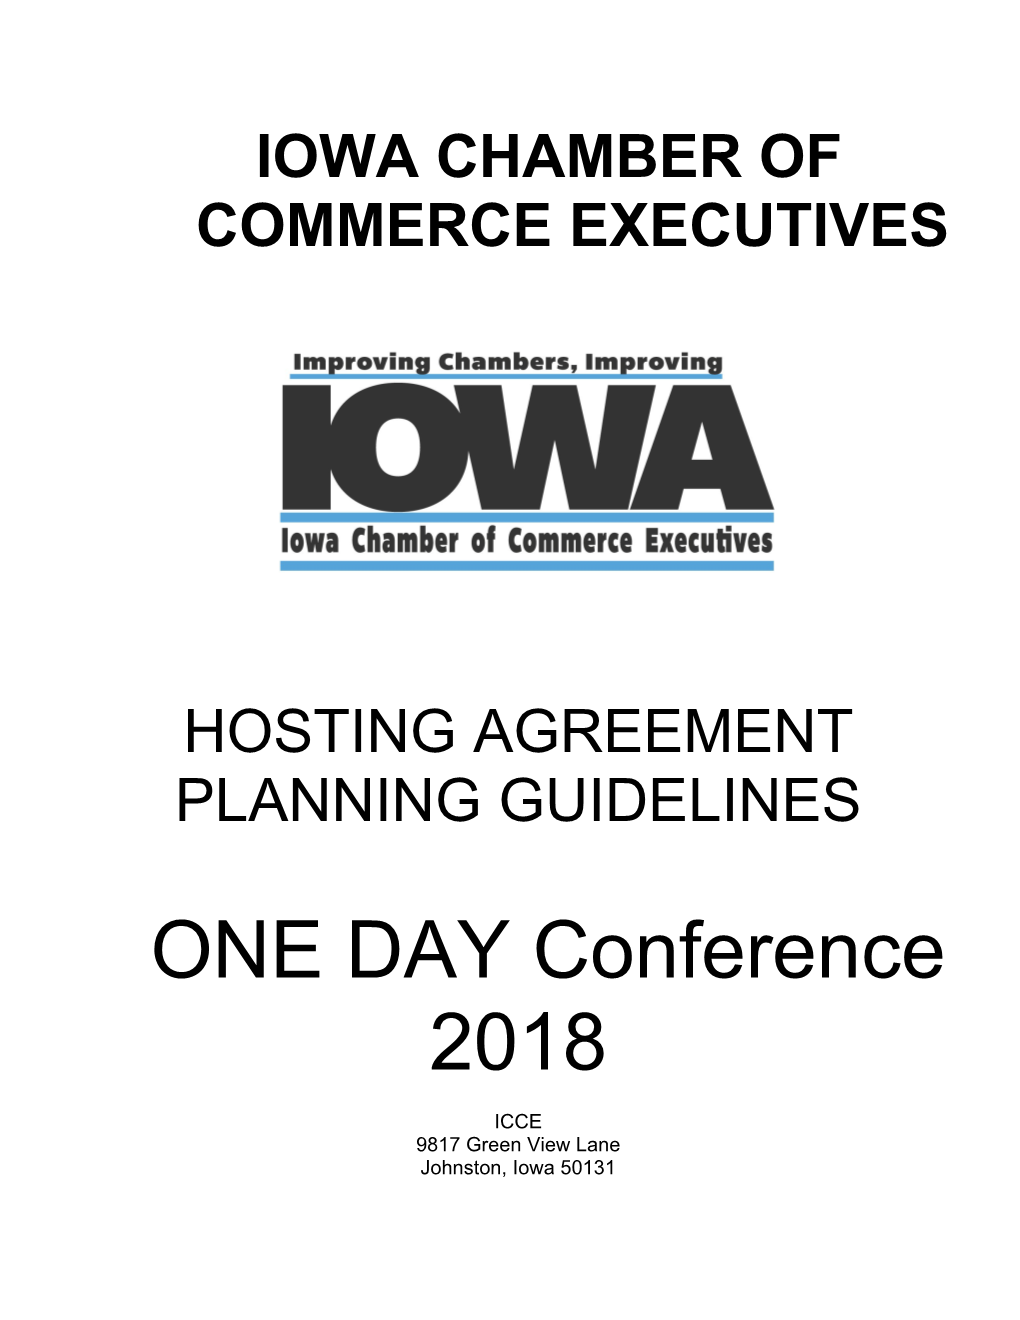 Iowa Chamber of Commerce Executives